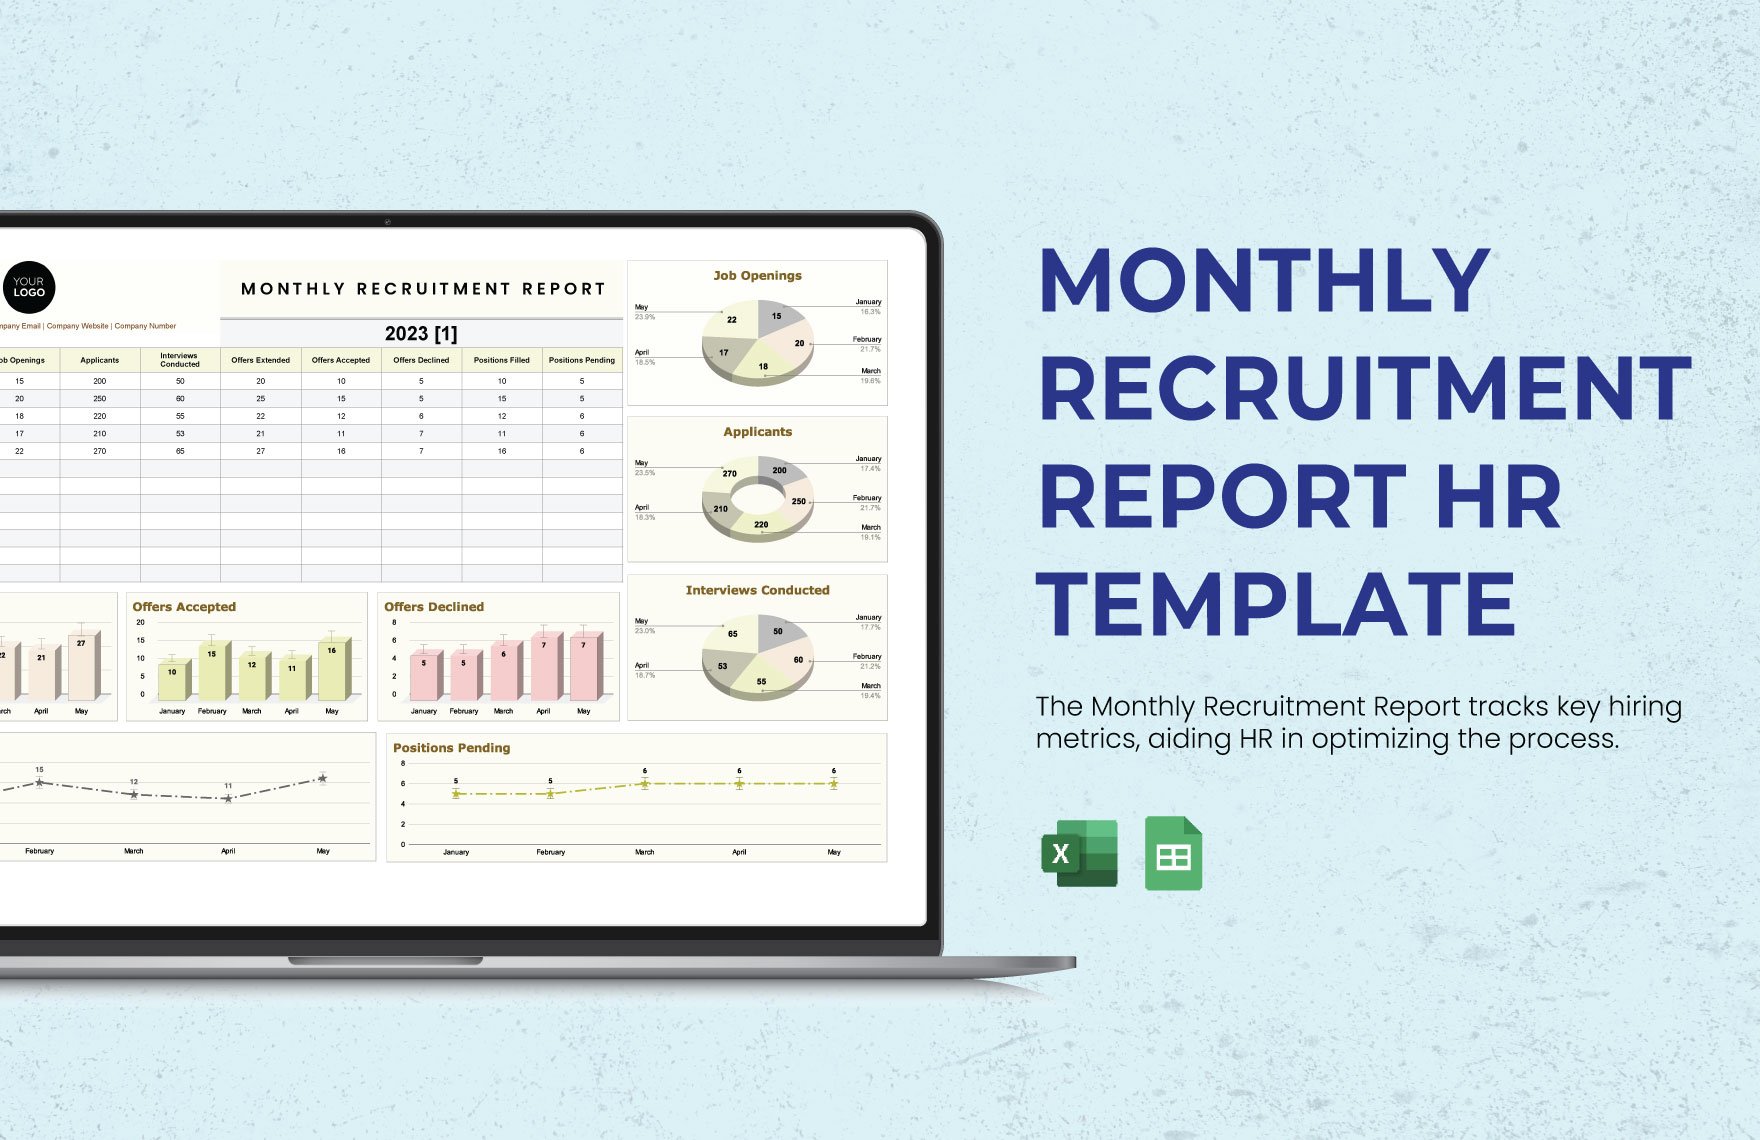 Monthly Recruitment Report HR Template